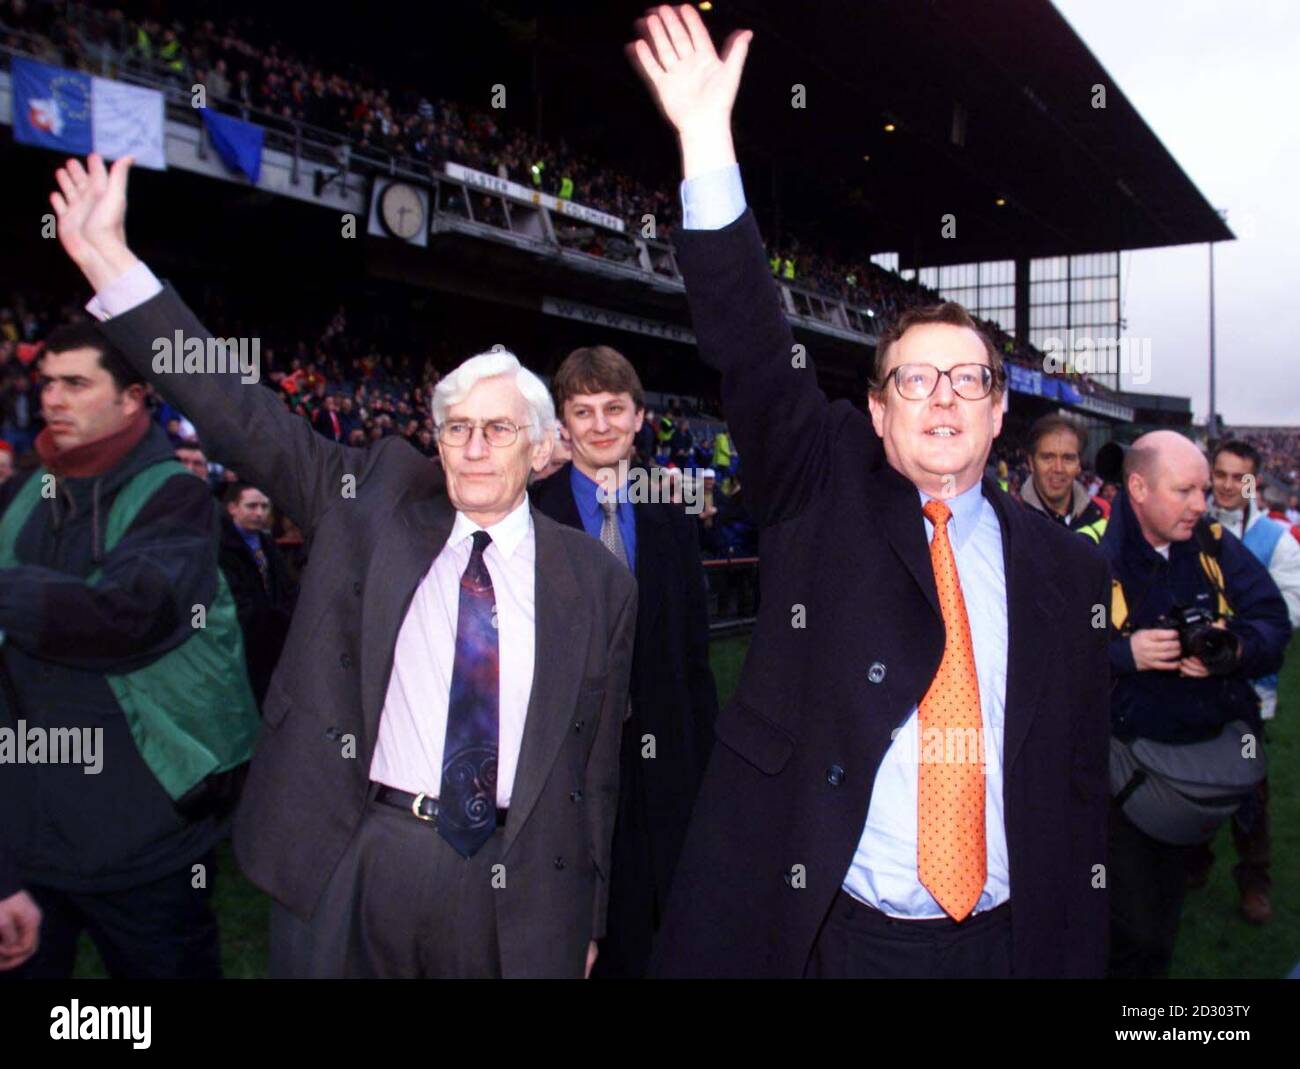 David Trimble (right) and Seamus Mallon, First and Second Ministers for Northern Ireland respectively, wave to the crowd at Lansdowne Road stadium in Dublin before the start of the rugby union European Cup final between  Ulster and Colomiers.  Stock Photo